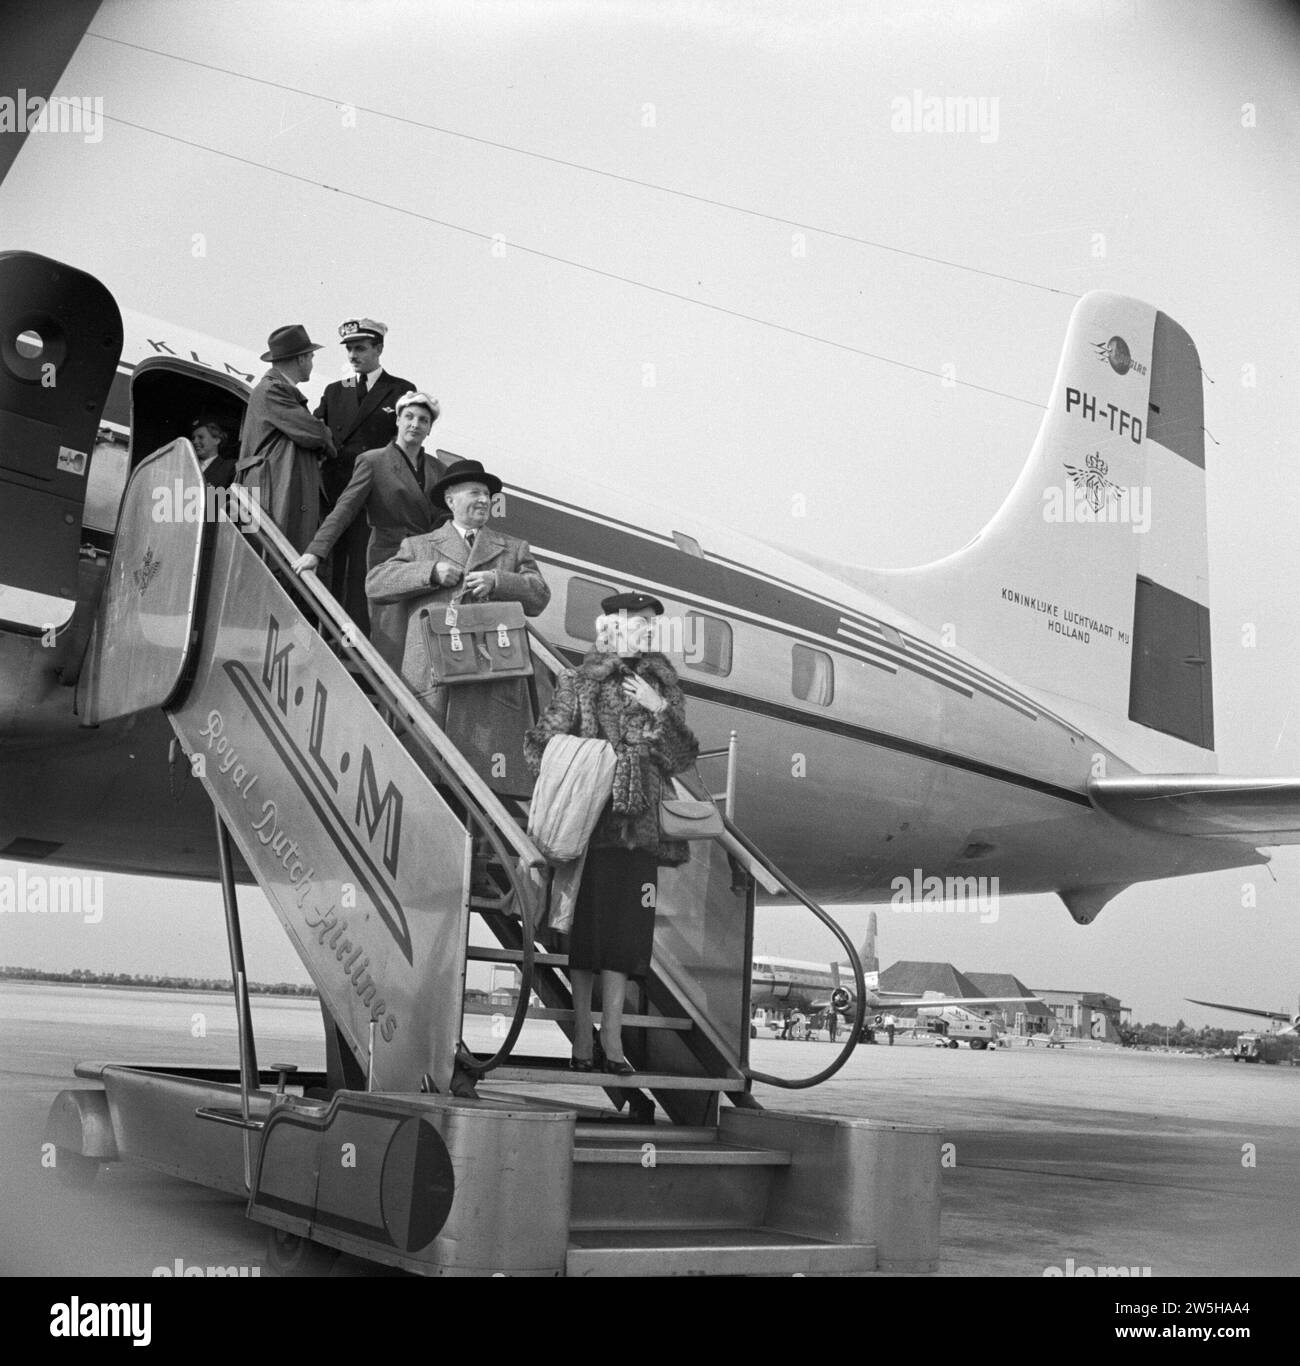 Passengers disembark from a KLM passenger plane via the stairs under the watchful eye of a KLM purser and stewardess ca. 1950 Stock Photo